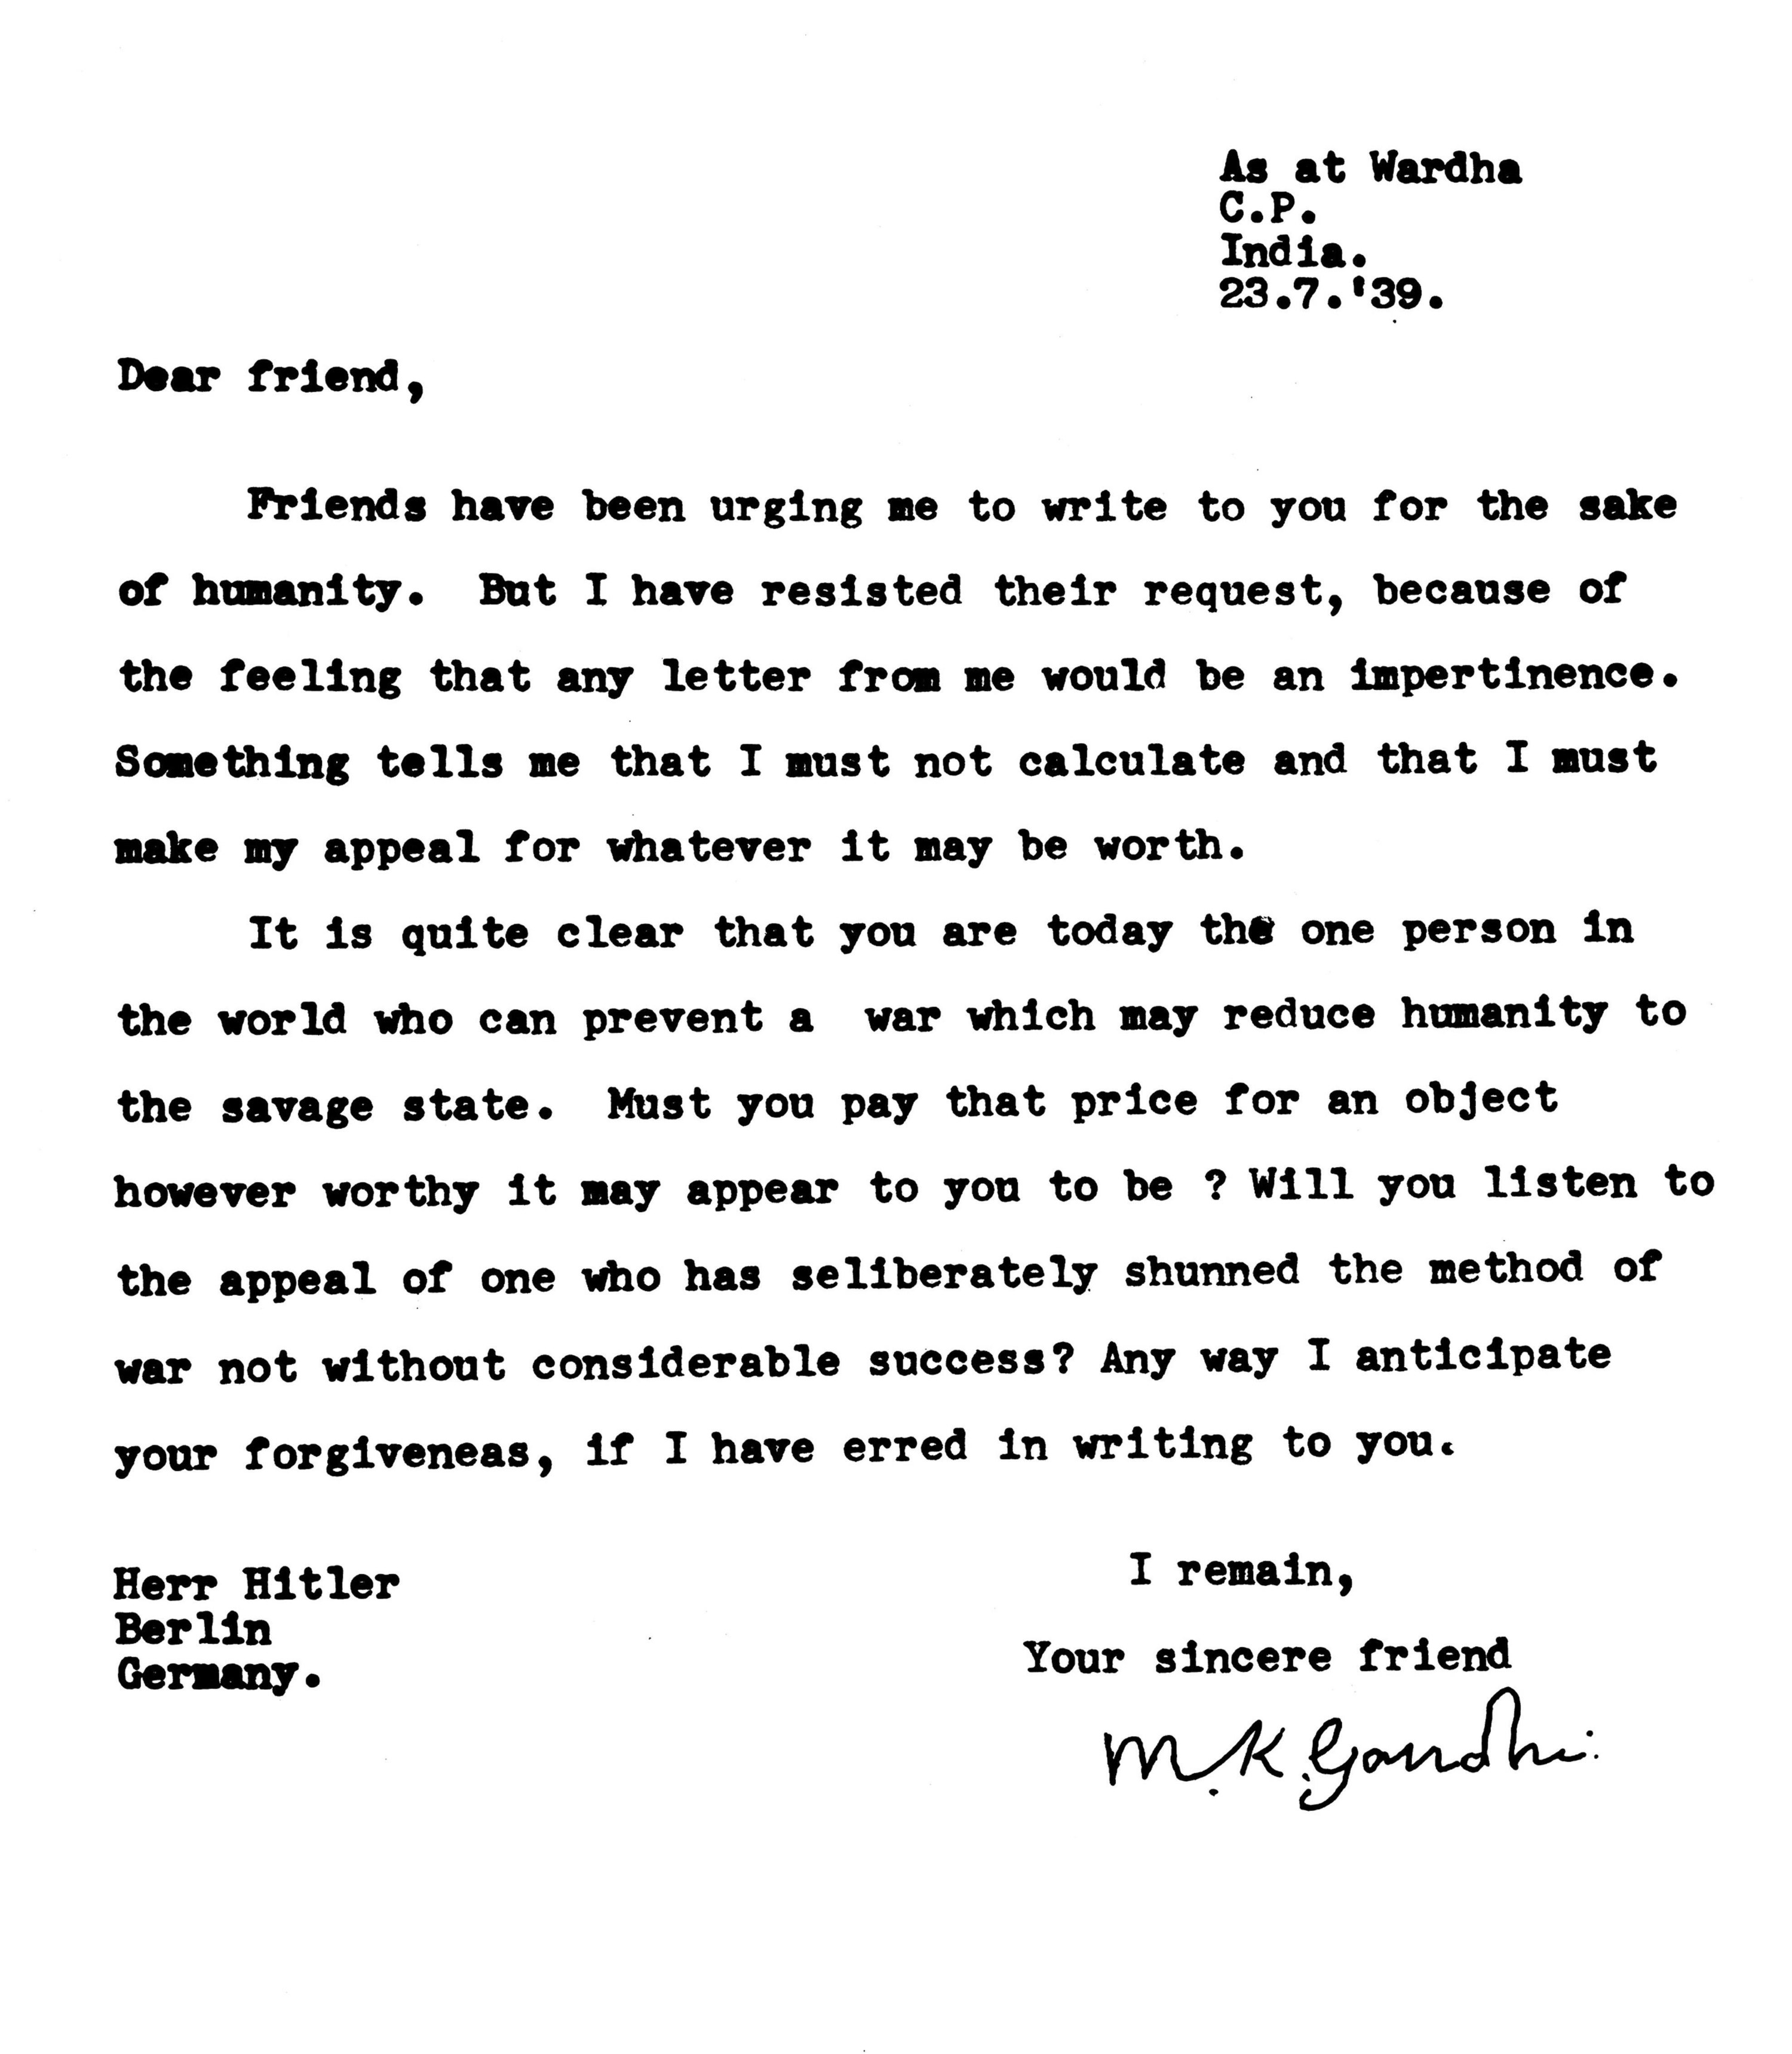 In a 7/23/39 letter signed &quot;Your sincere friend,&quot; Gandhi asks &quot;Herr Hitler,&quot; &quot;the one person in the world who can prevent a war,&quot; &quot;Will you listen to the appeal of one who has [d]eliberately shunned the method of war not without considerable success?&quot;